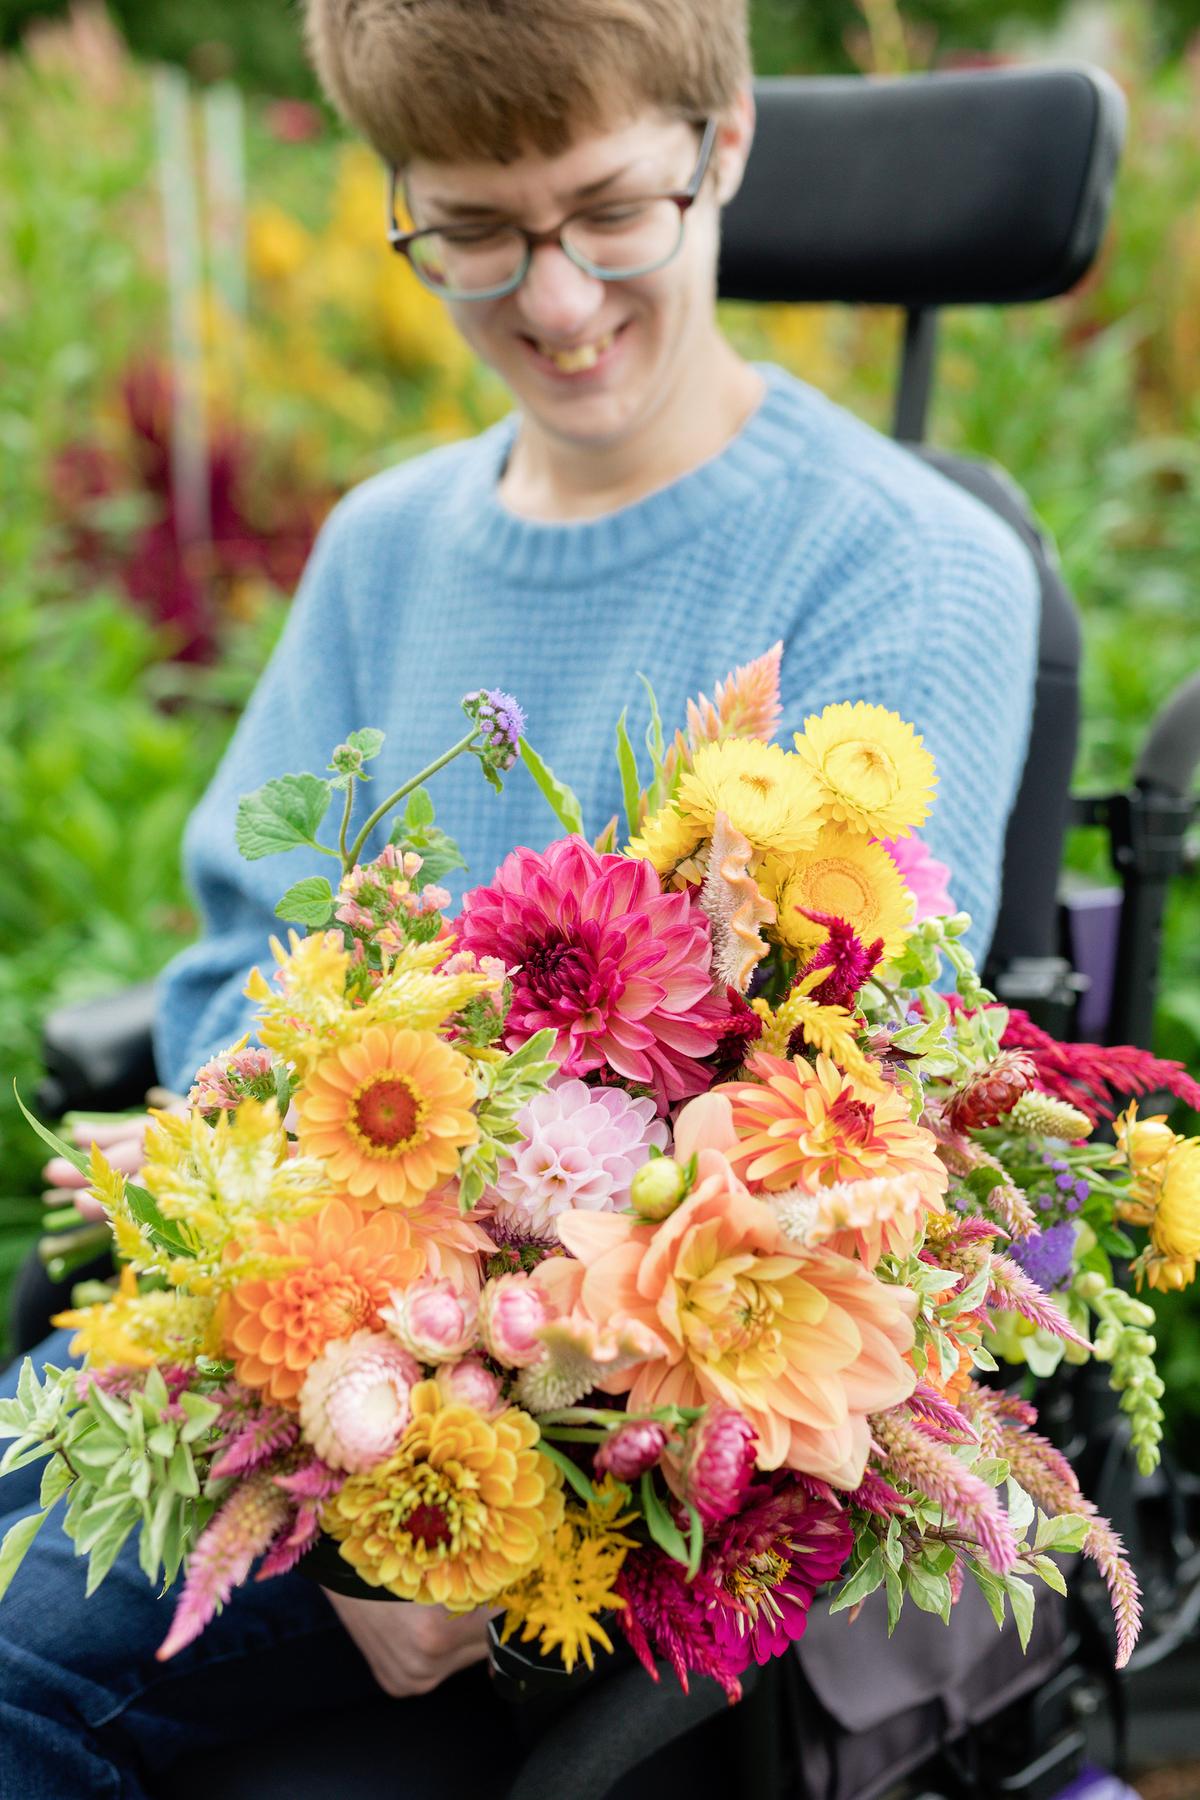 Emily Zondlak, a published author and ministry volunteer, handles customer relations and administration for Two Sisters Flower Farm. (Courtesy of Britney Zondlak)